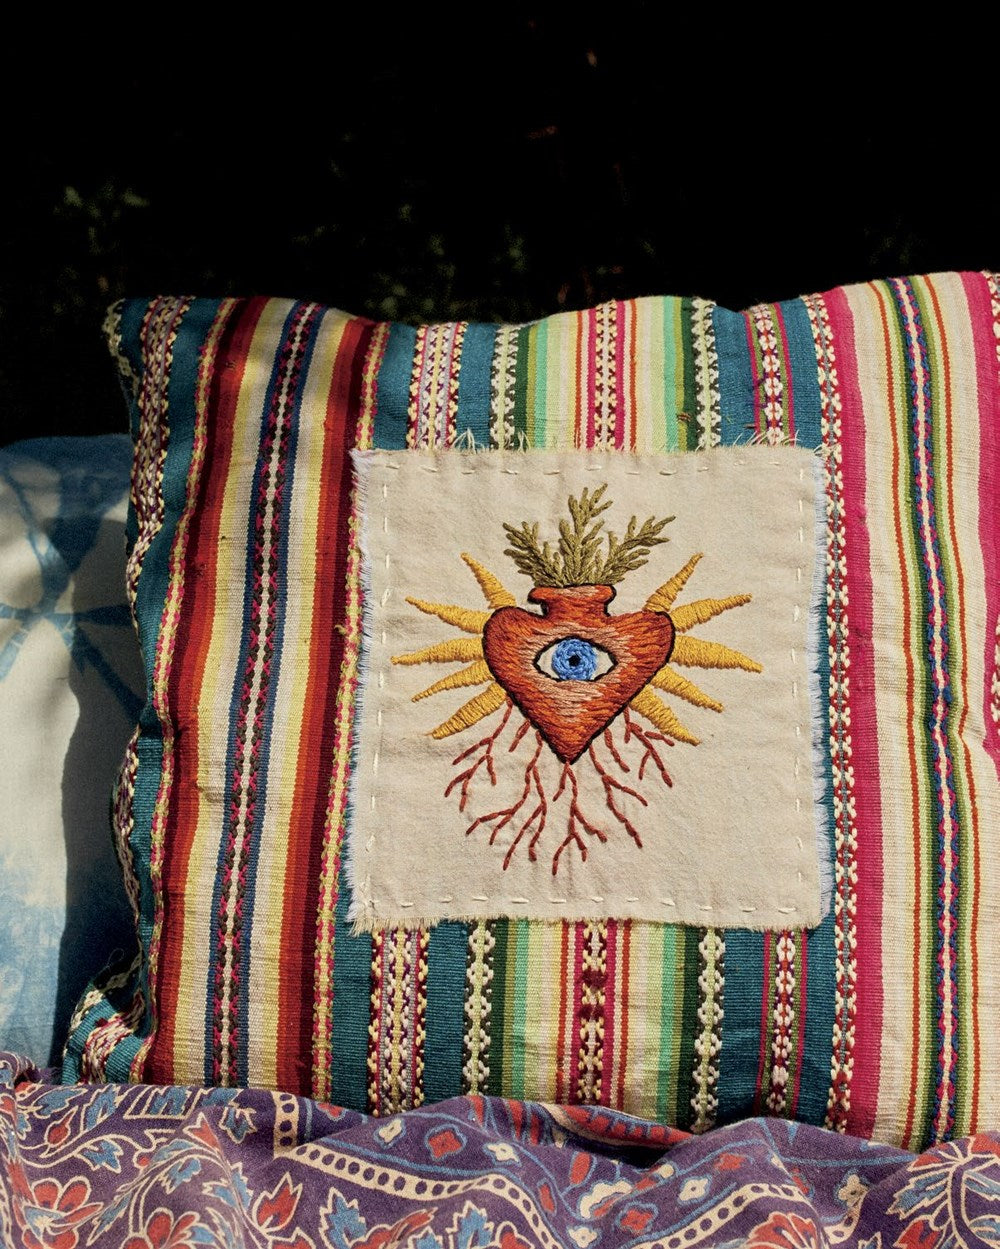 Book - Mystical Stitches - Embroidery for Personal Empowerment and Mag